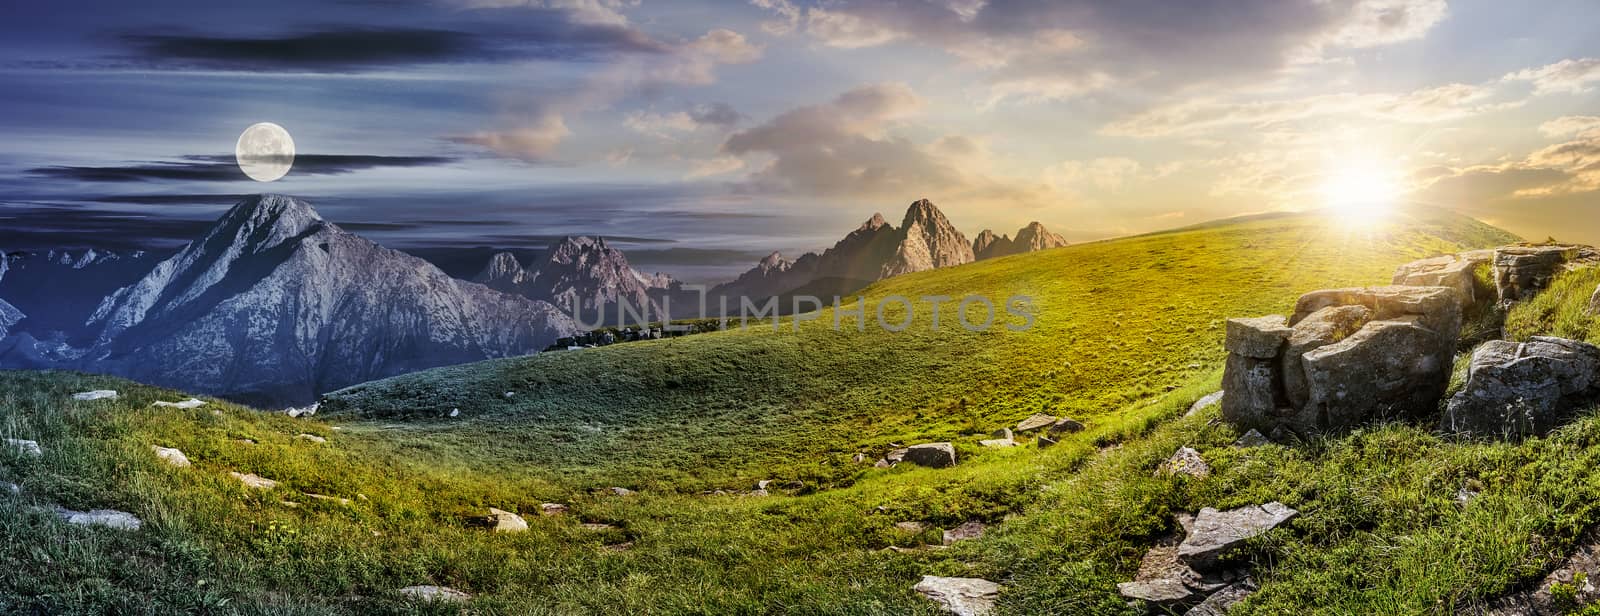 Summer landscape concept of Day and Night meet in High Tatra Mountains on a meadow with huge stones among the grass on top of the hillside near the peaks